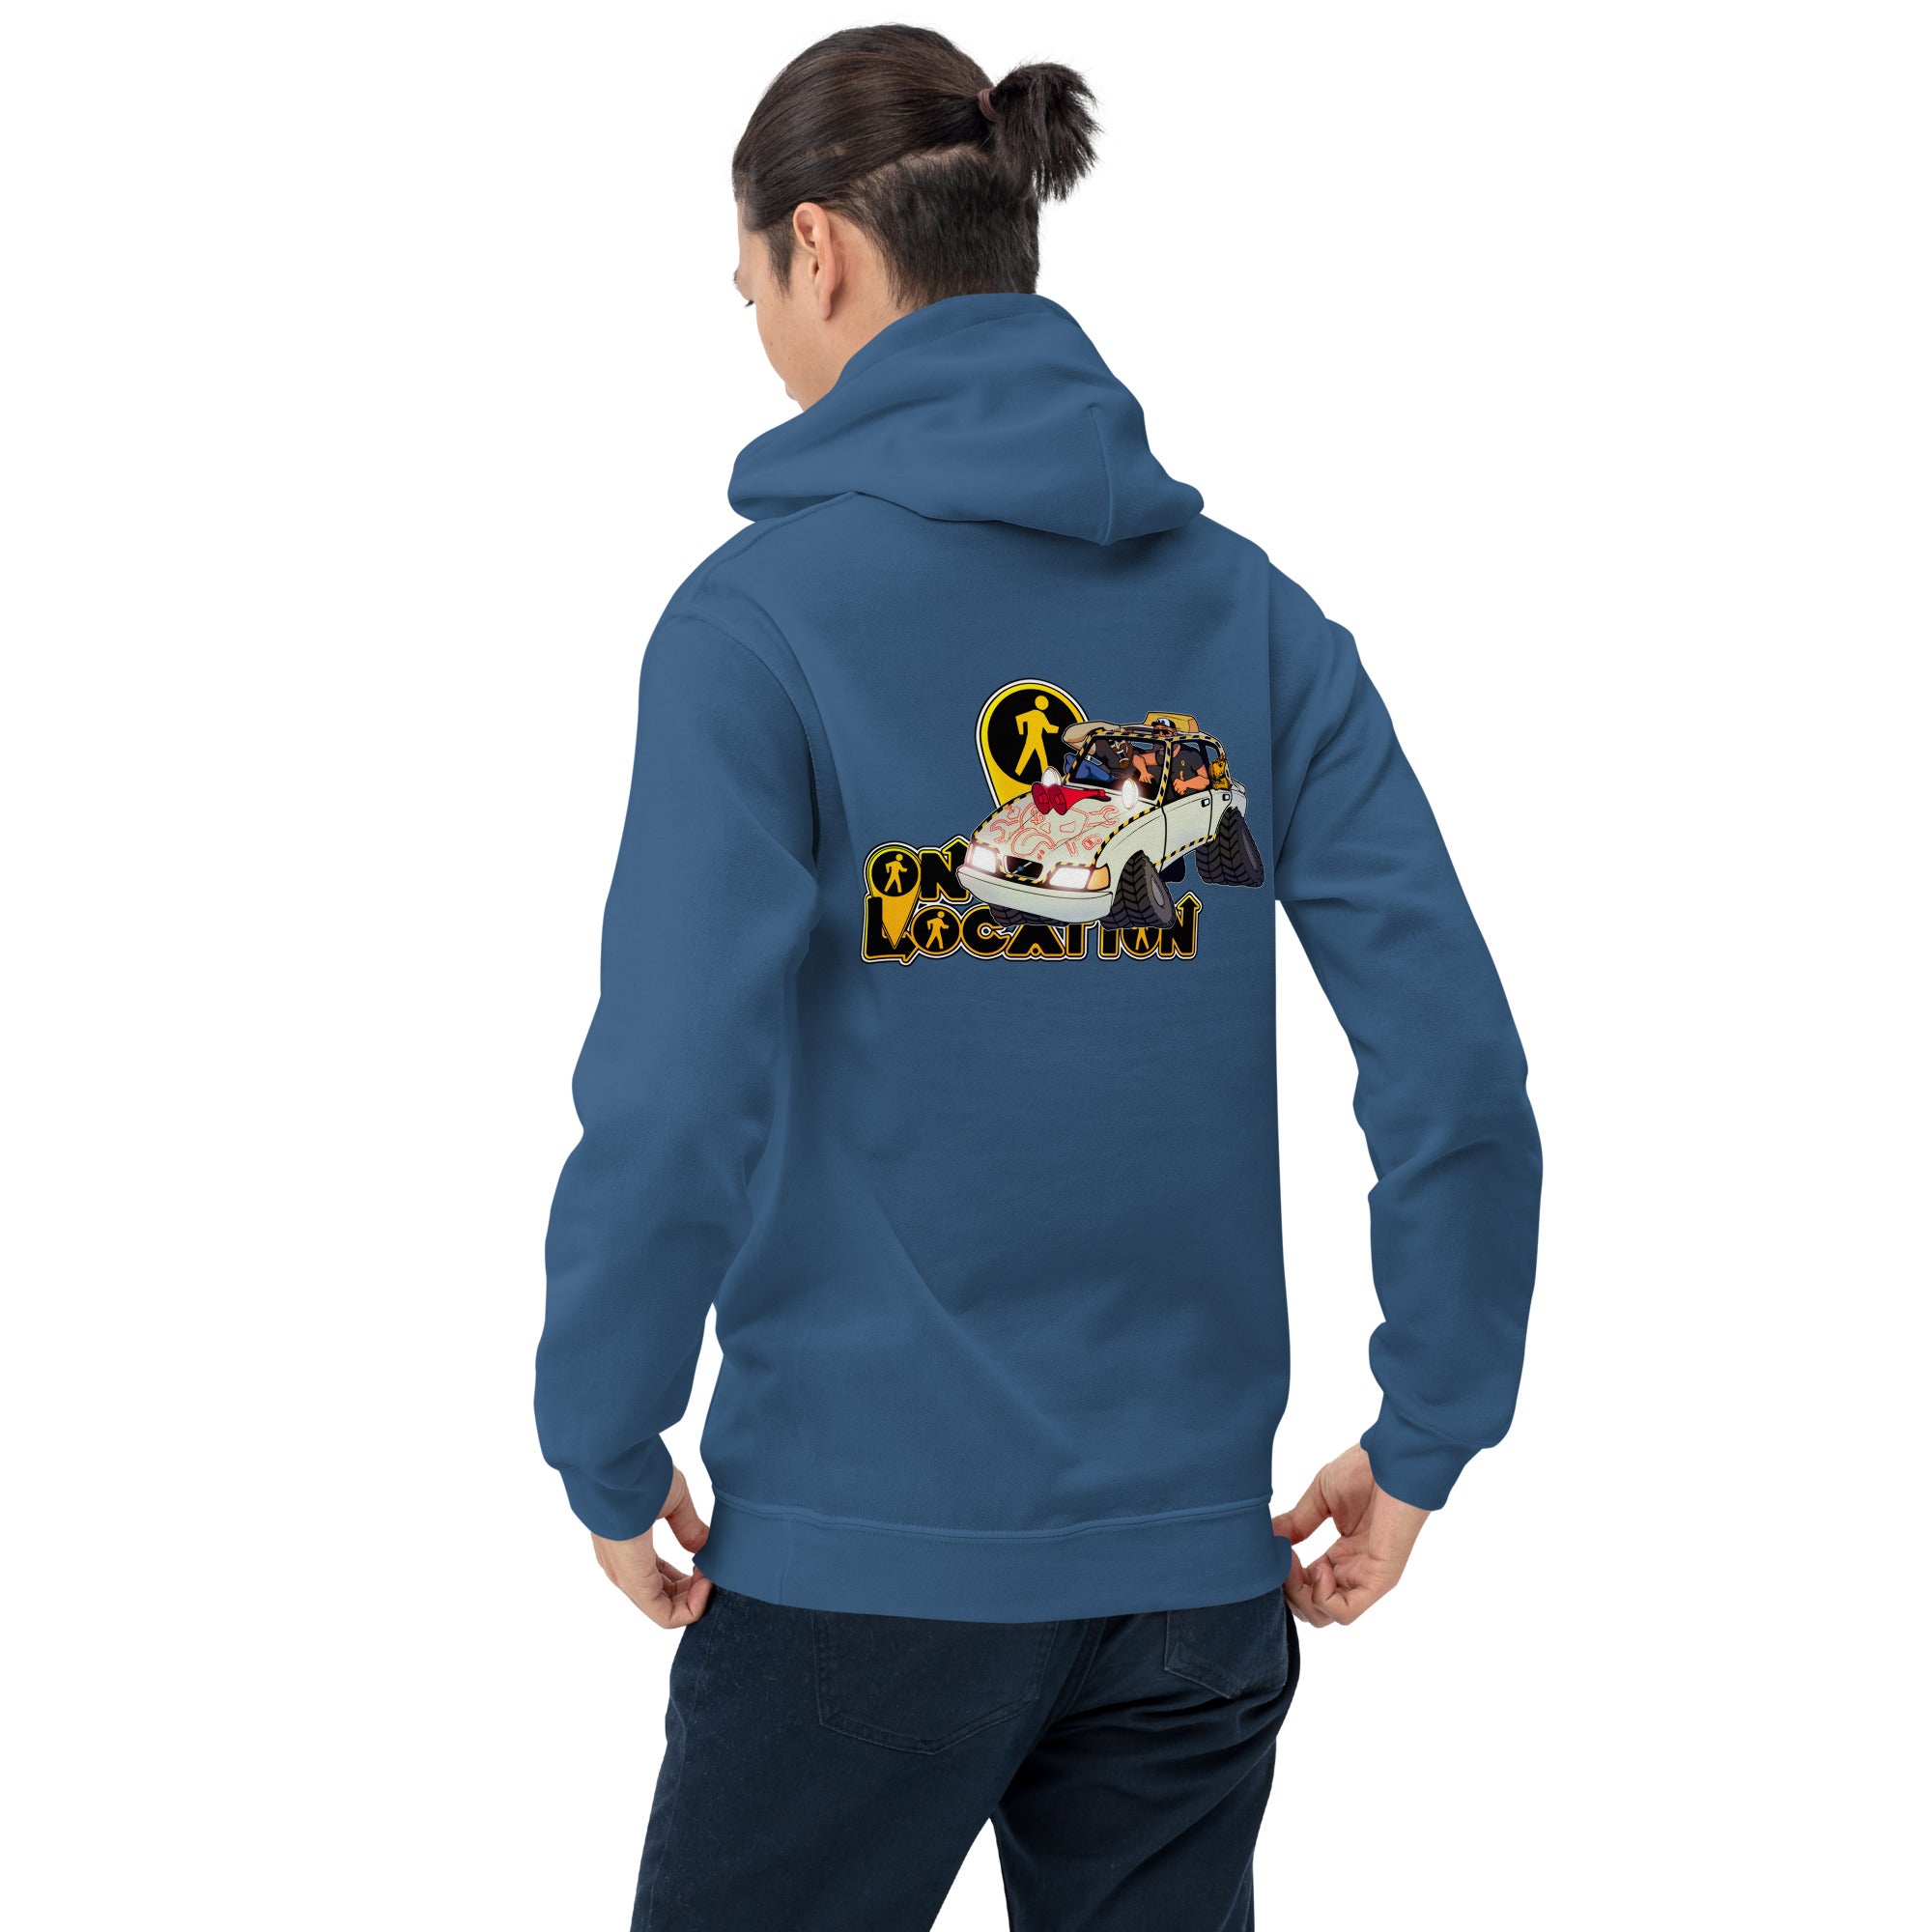 Navigation Driving Challenge Unisex Hoodie - Back Graphic (multiple colors)